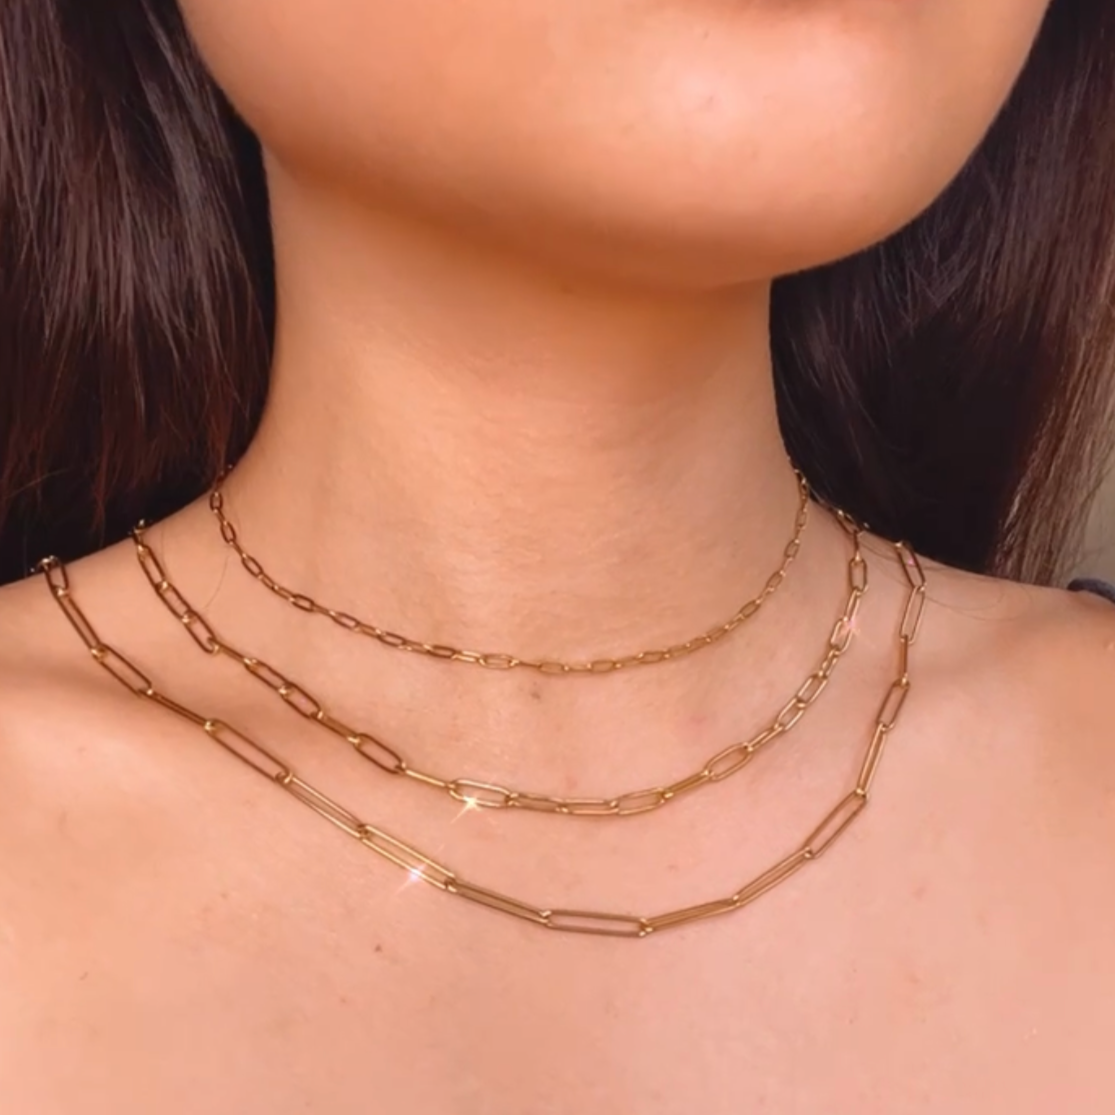 Long Paperlink Chain Gold Filled Necklace / Choker